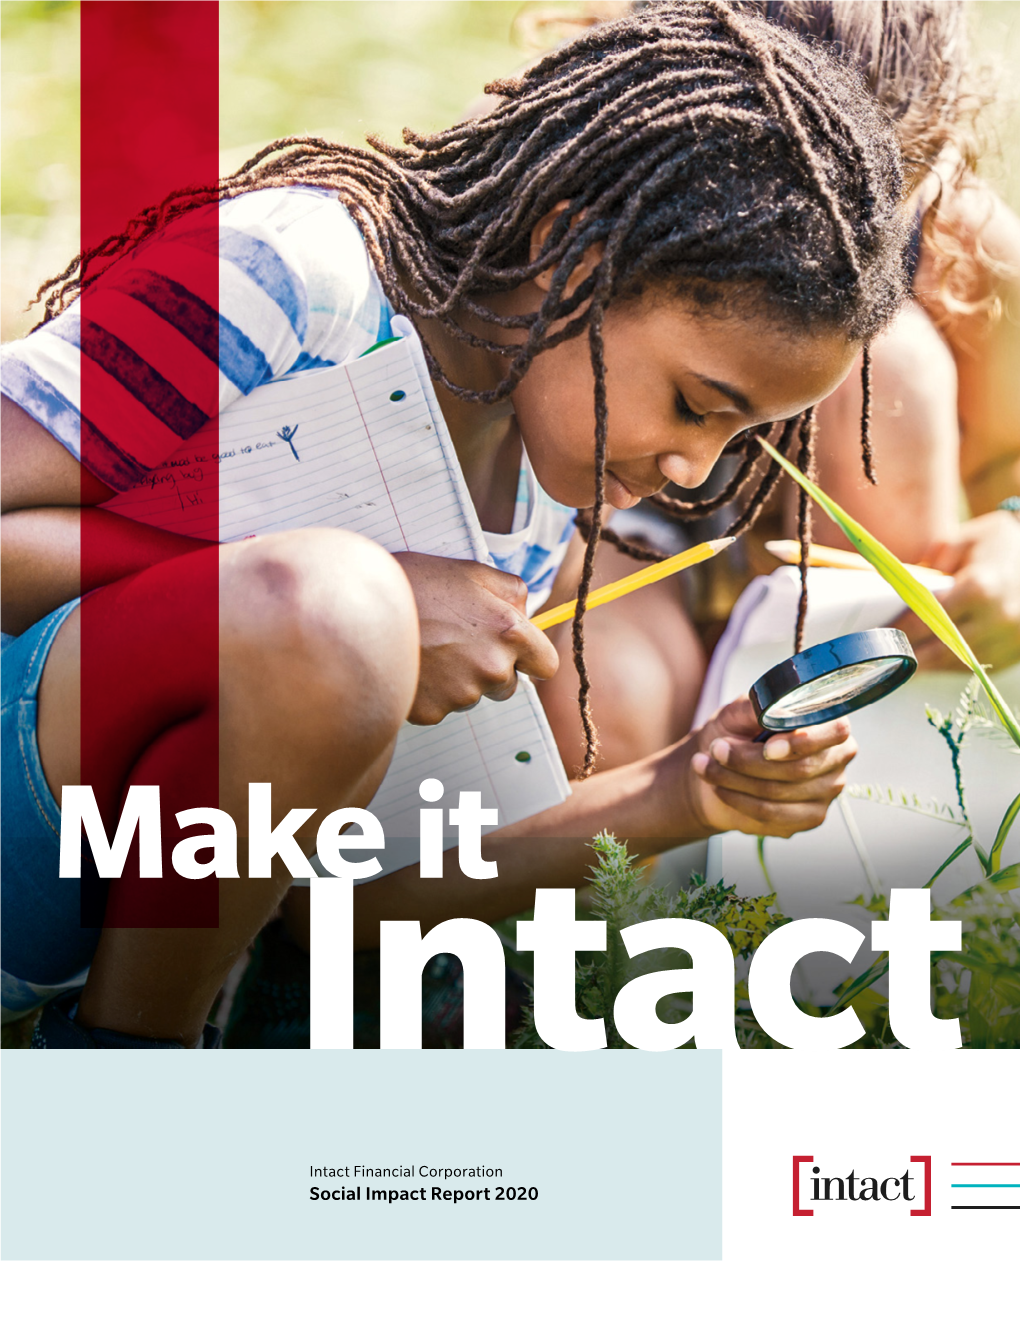 Social Impact Report 2020 Our Purpose, Values and Core Belief